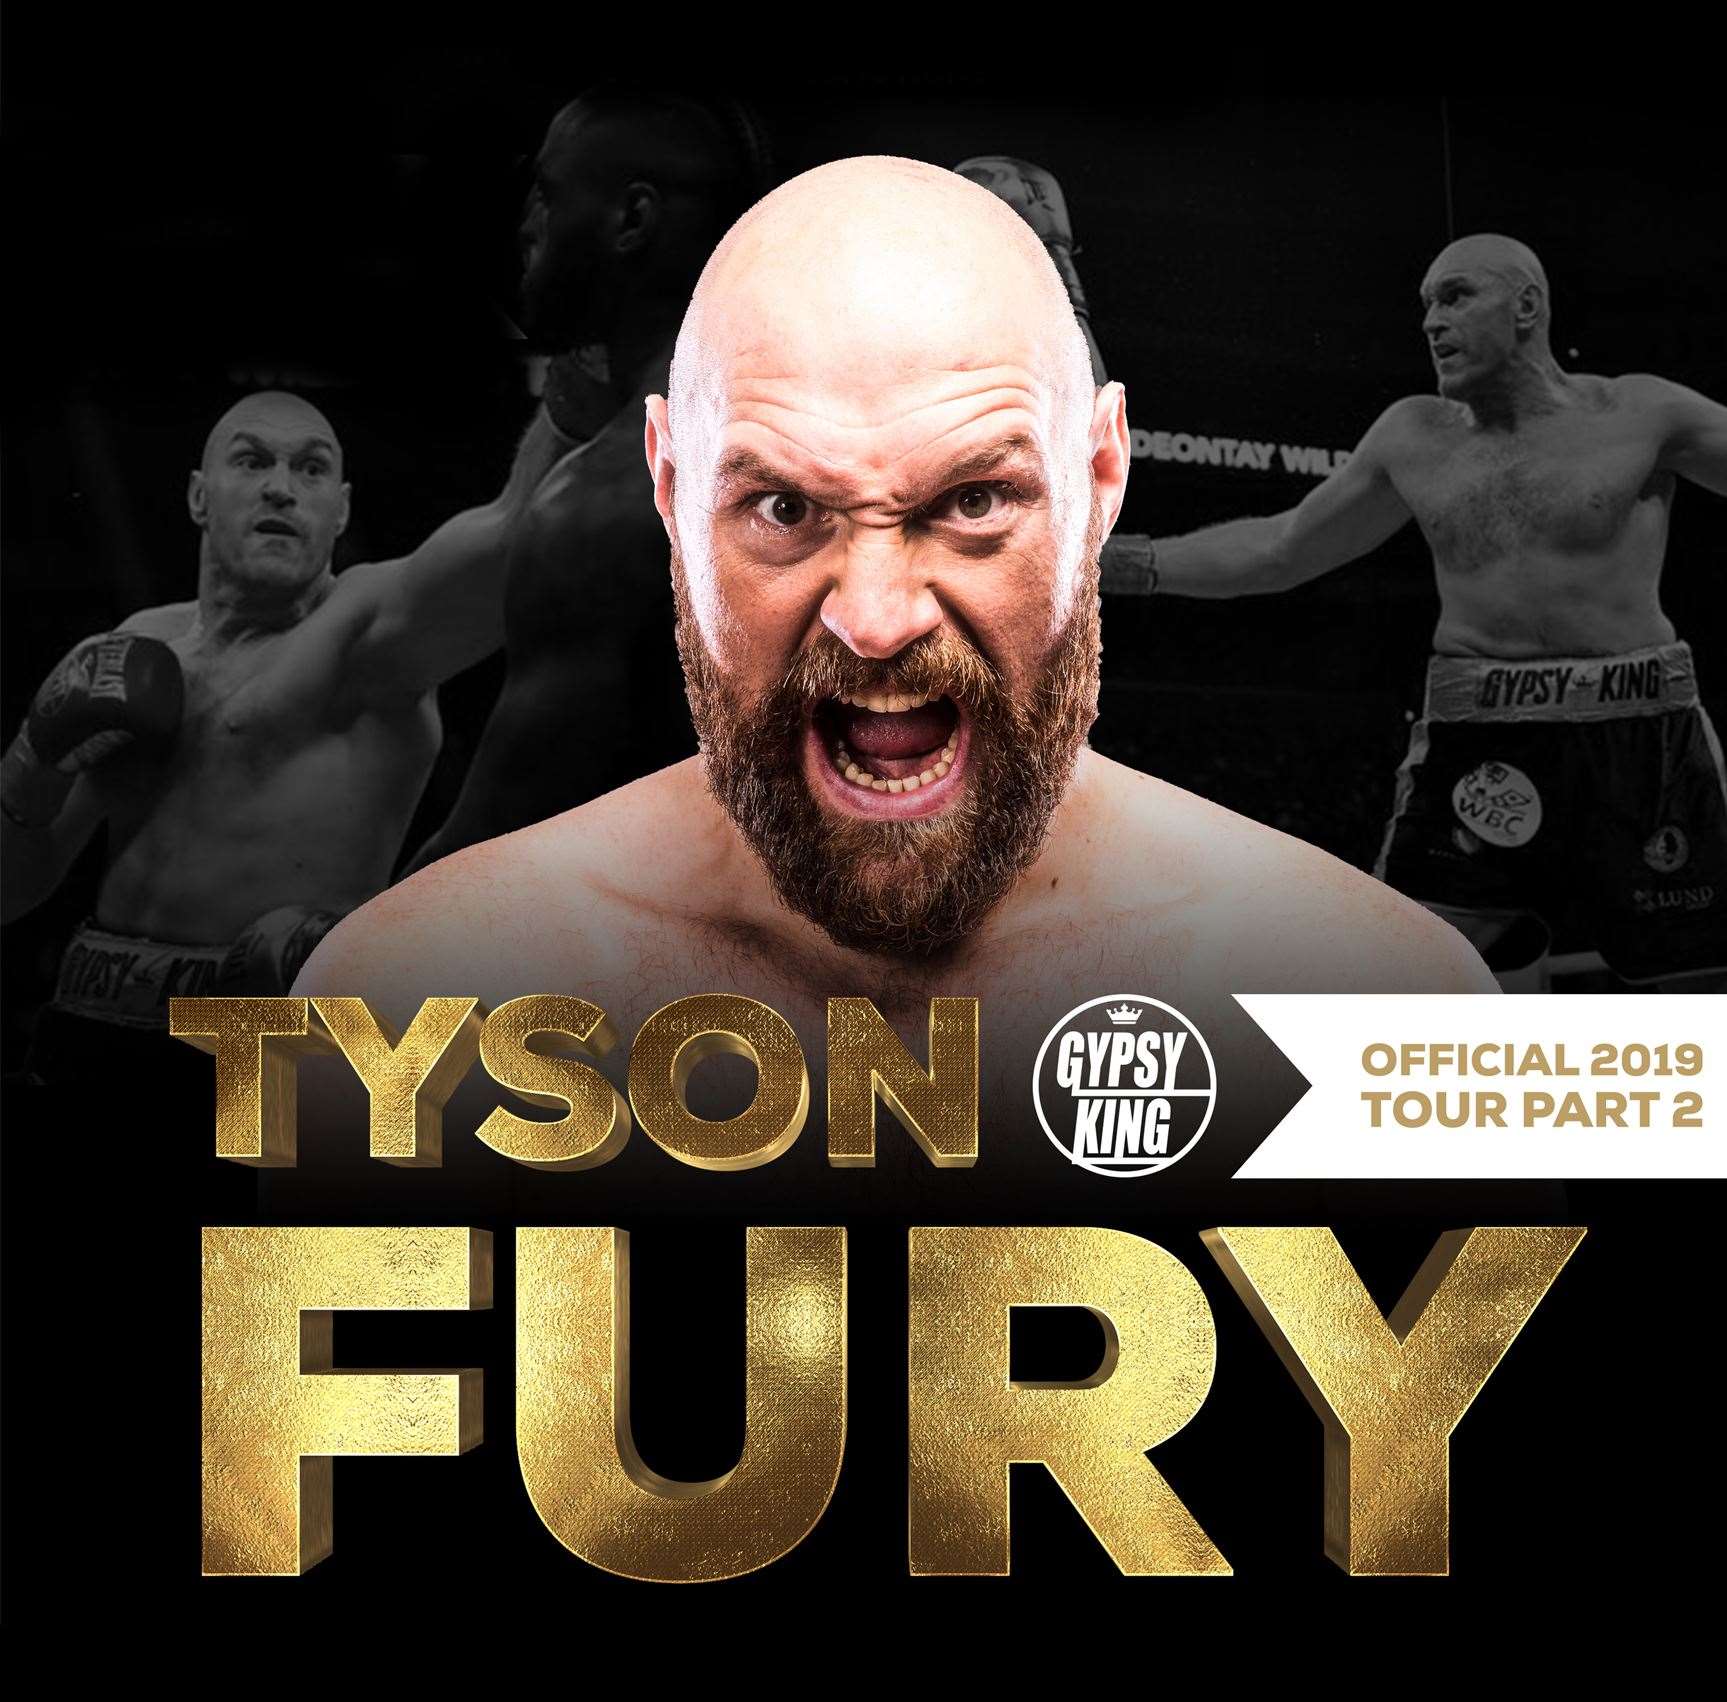 Tyson Fury will be in Maidstone